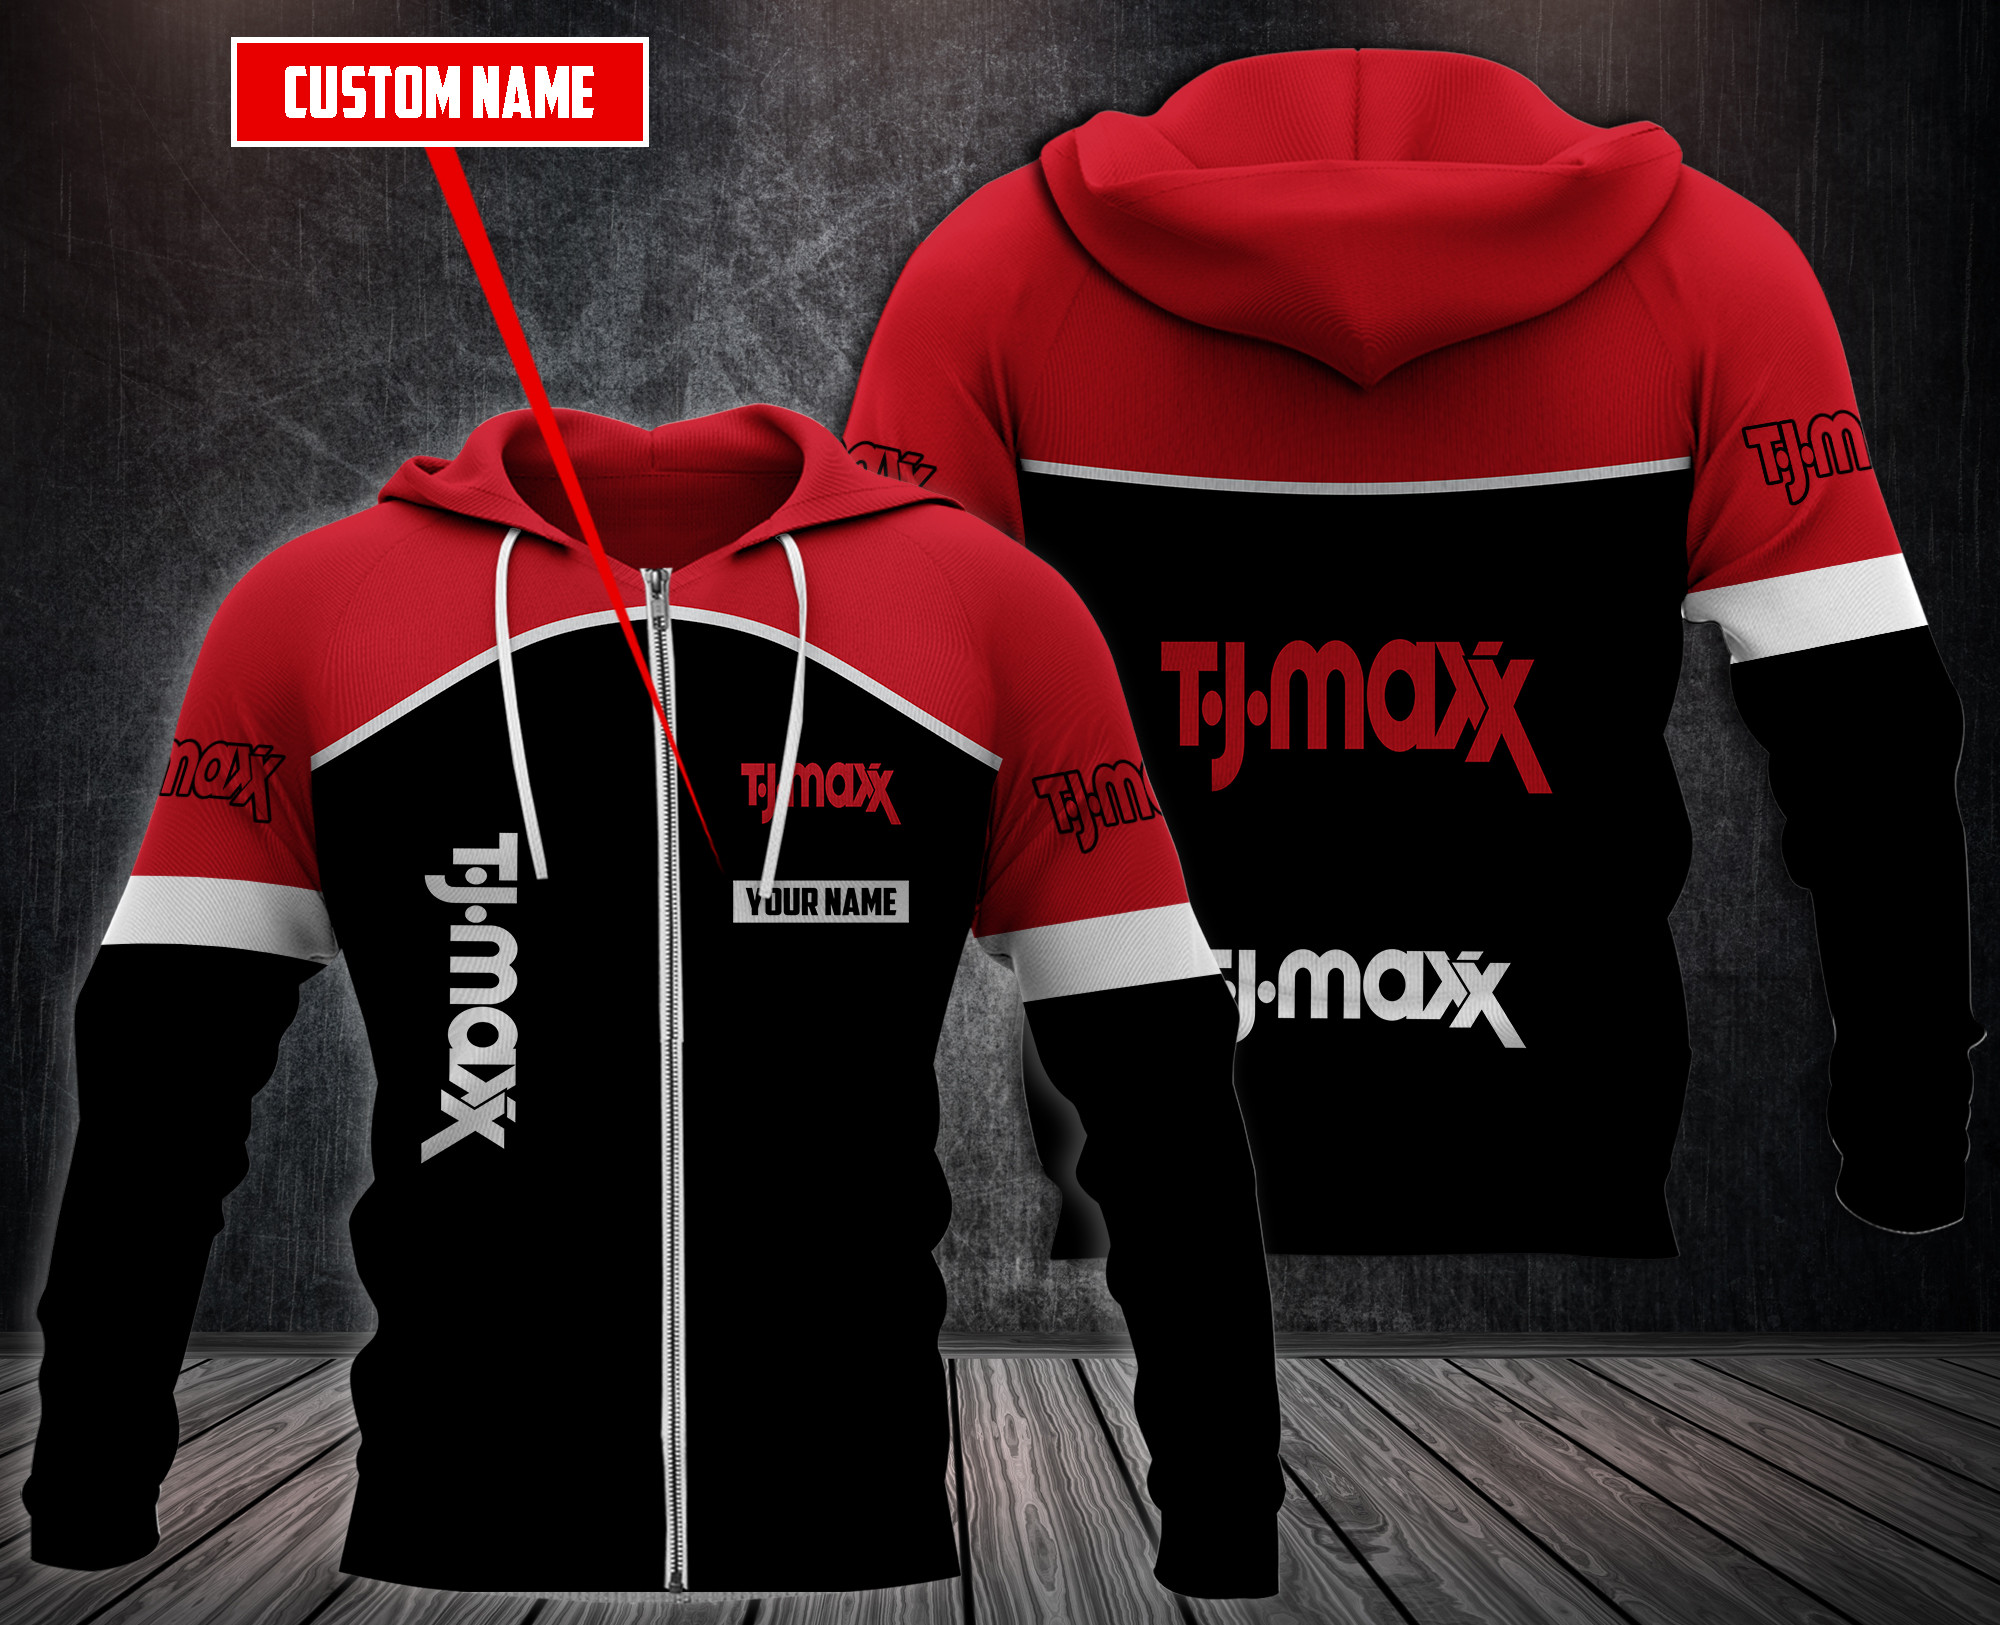 Choose the right hoodies for you on our boxboxshirt and ethershirt websites in 2022 65